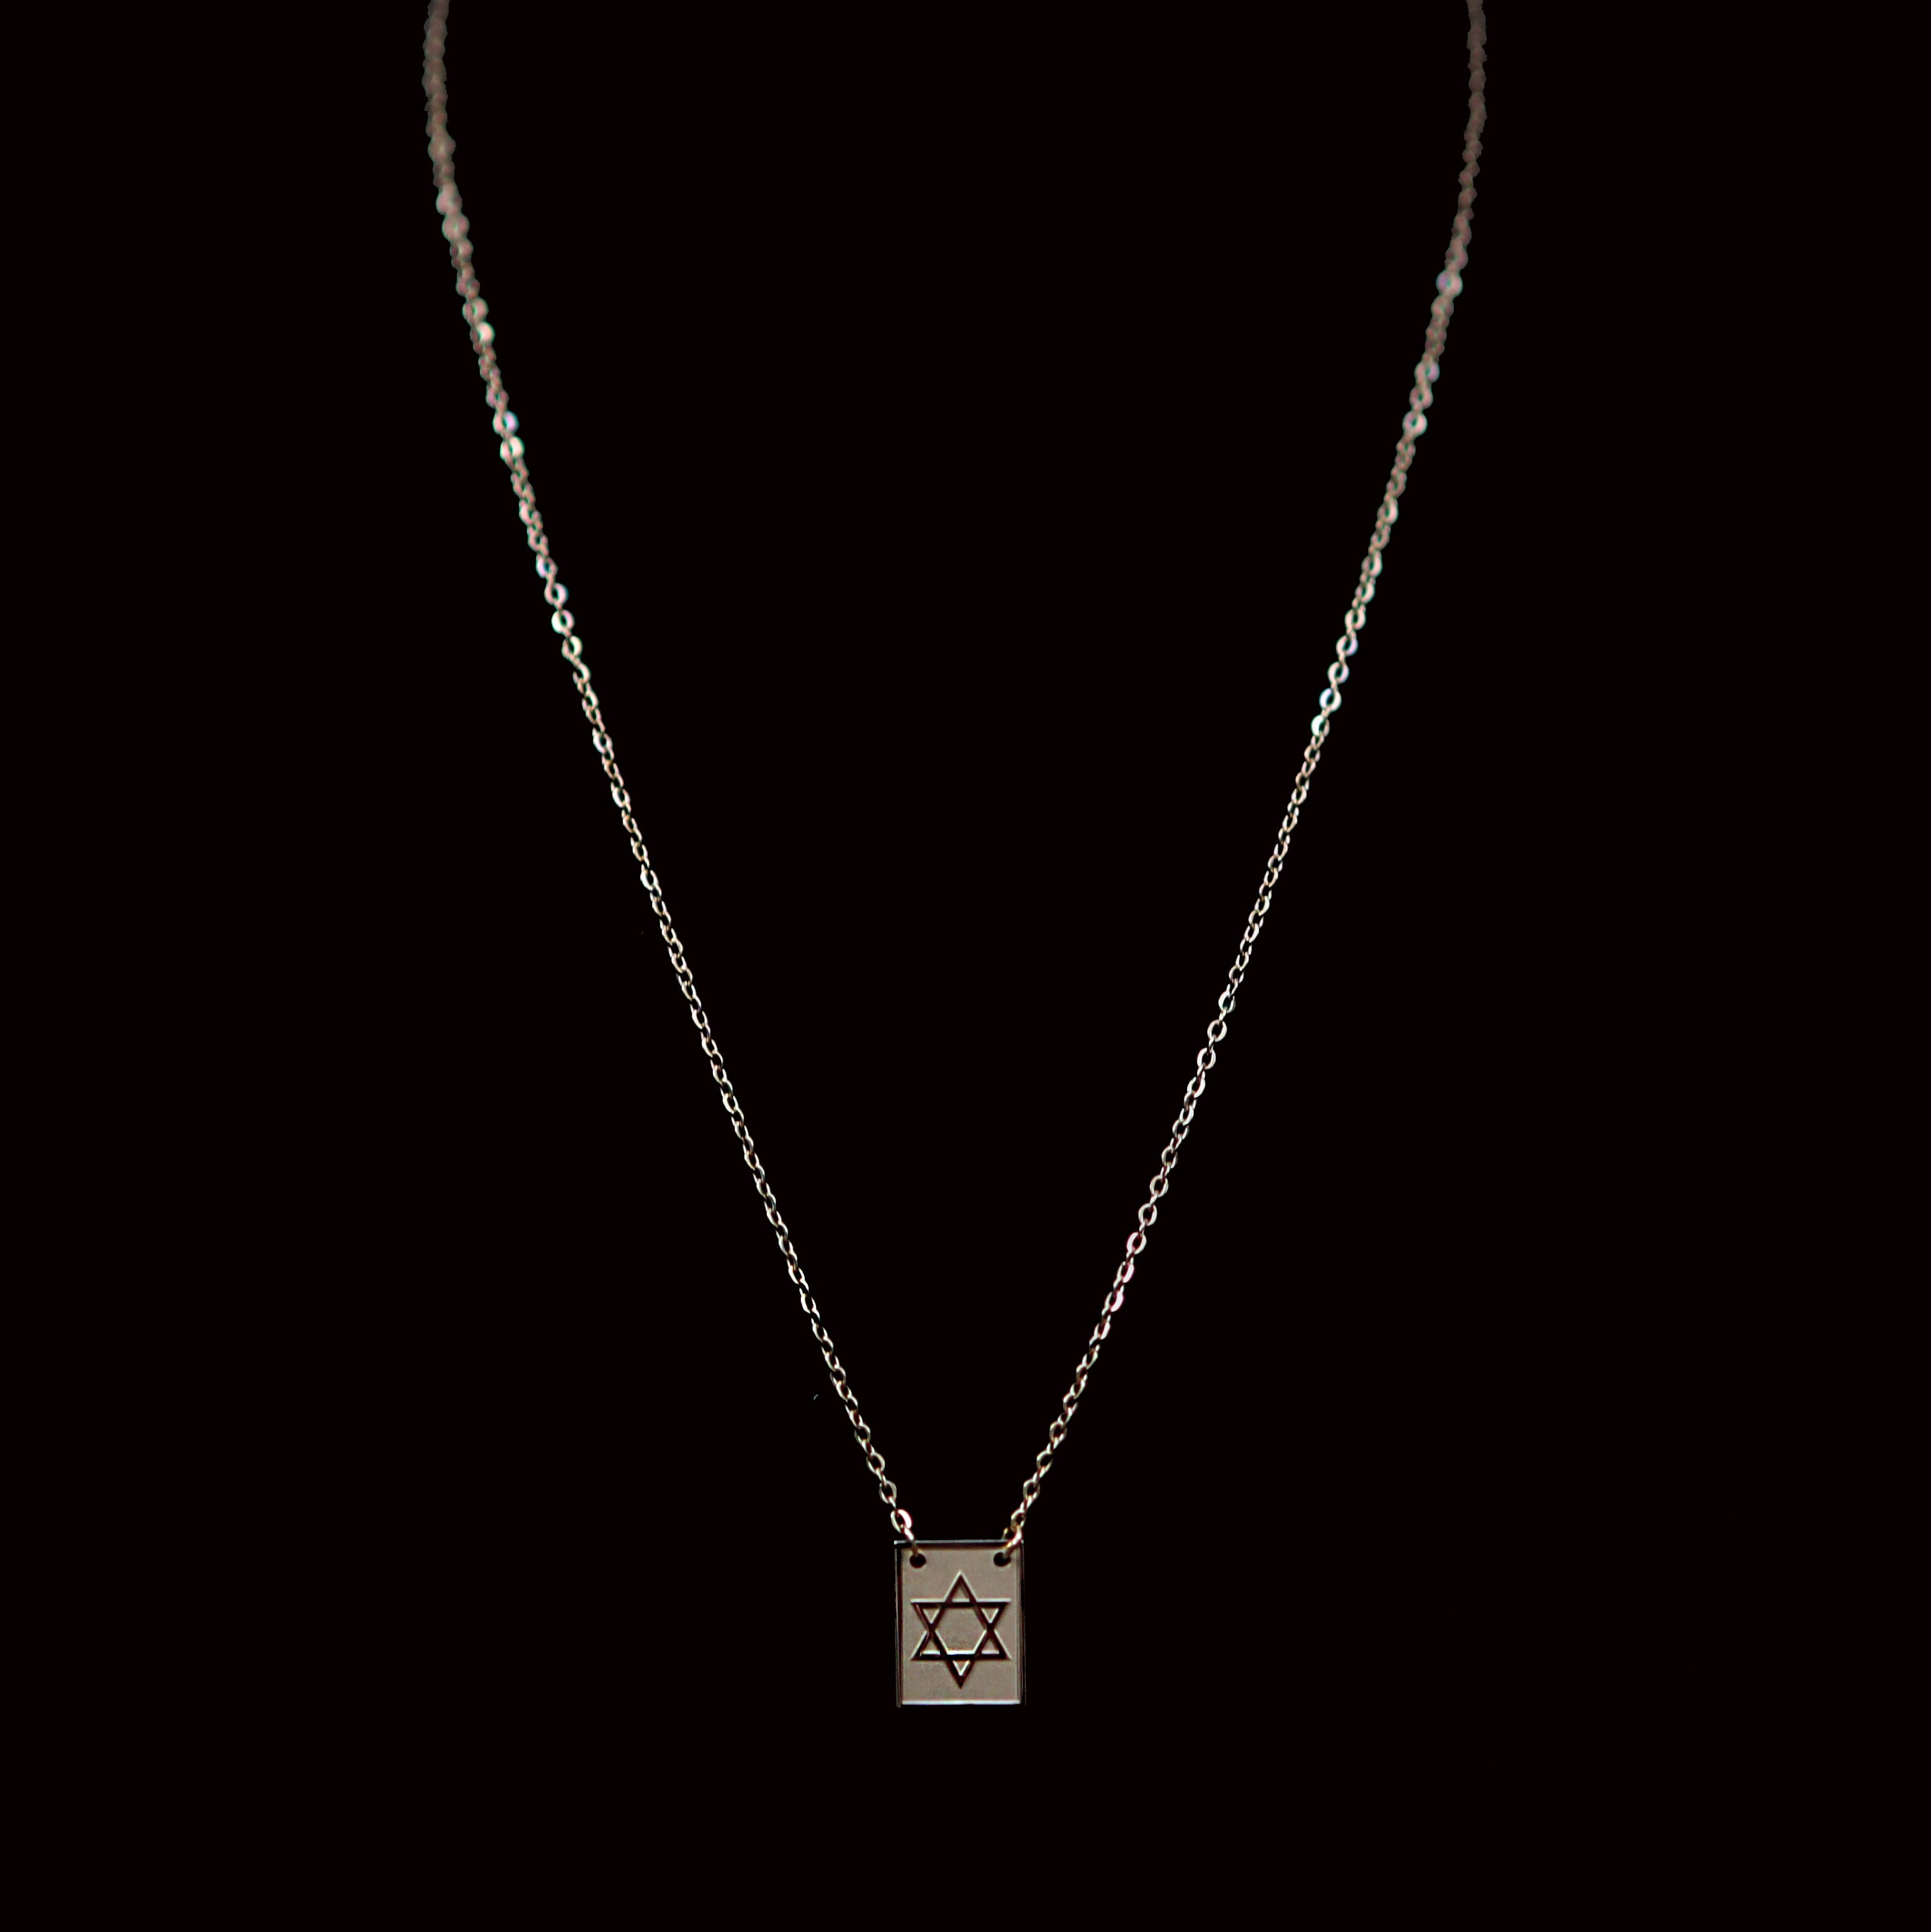 Kaison Stainless Steel Chain Necklace with Symbolic Pendant